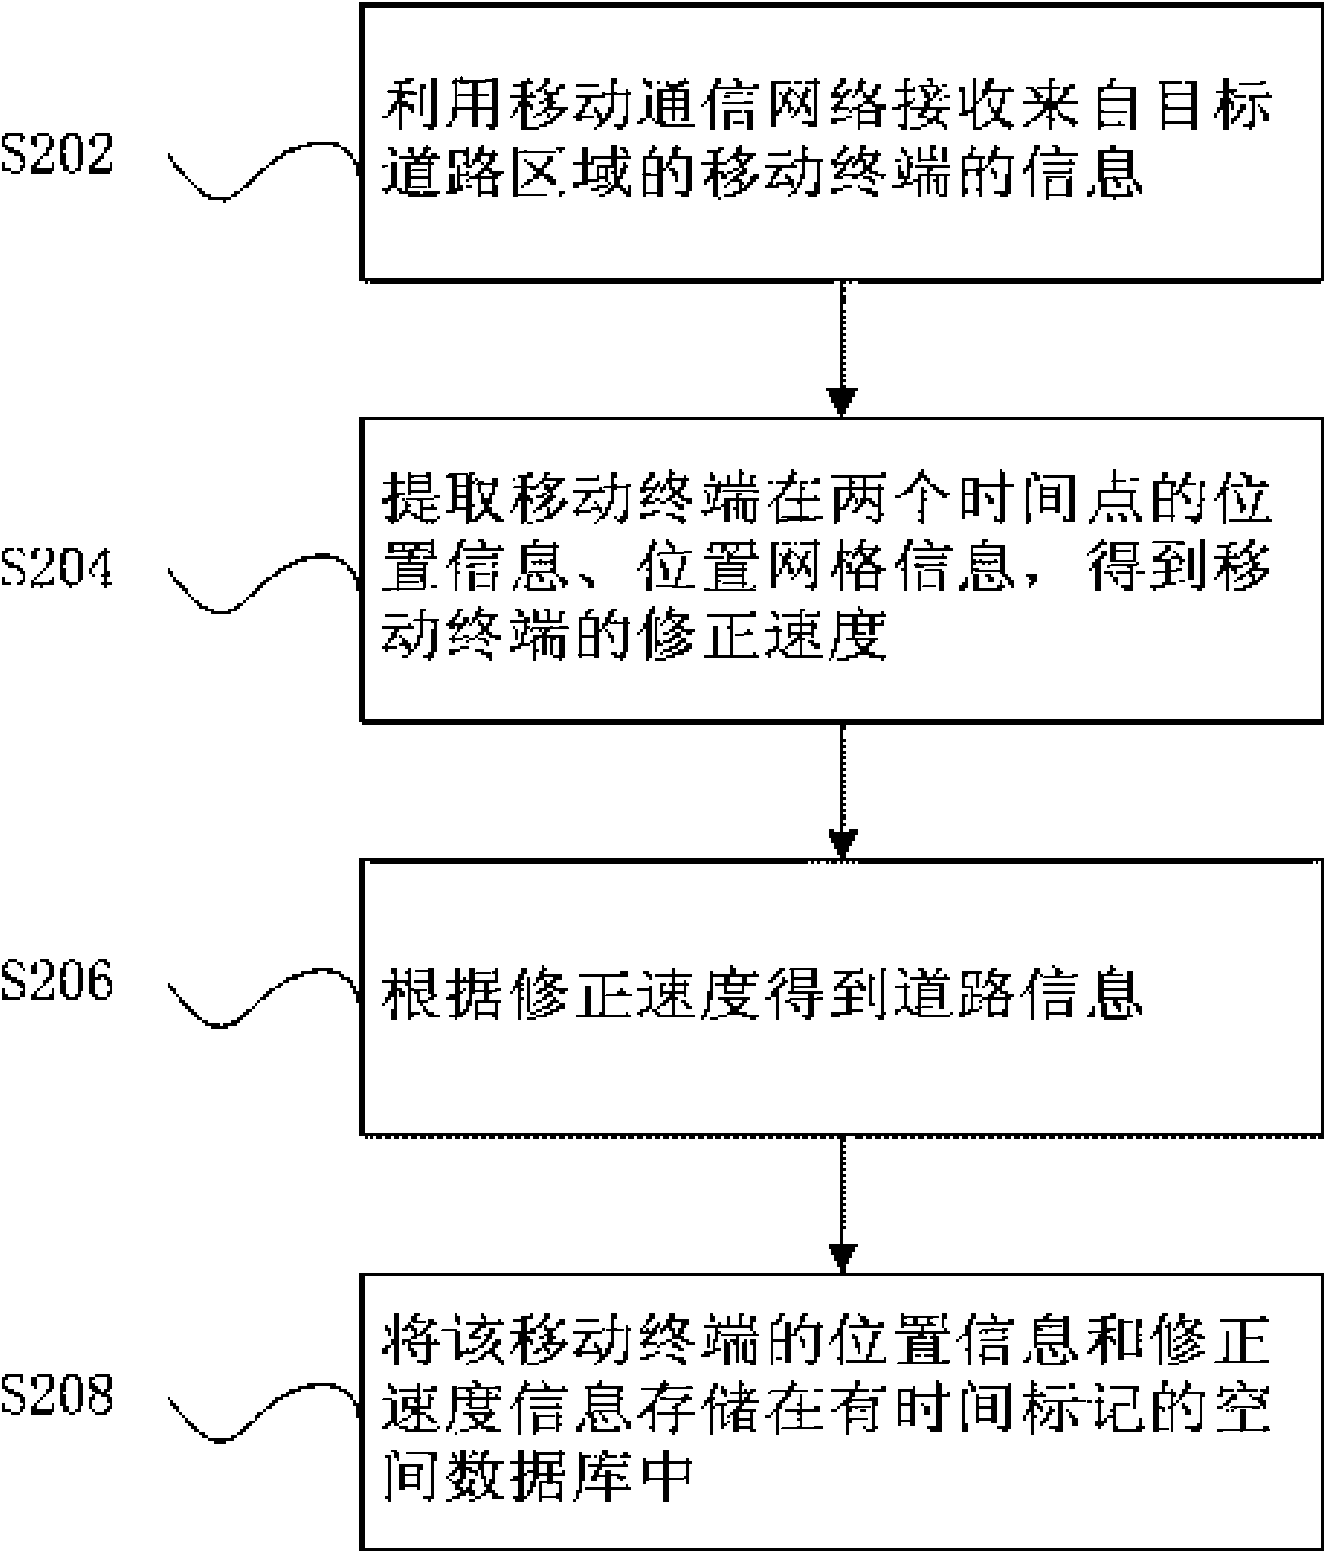 Method and system for obtaining road information by mobile communication network